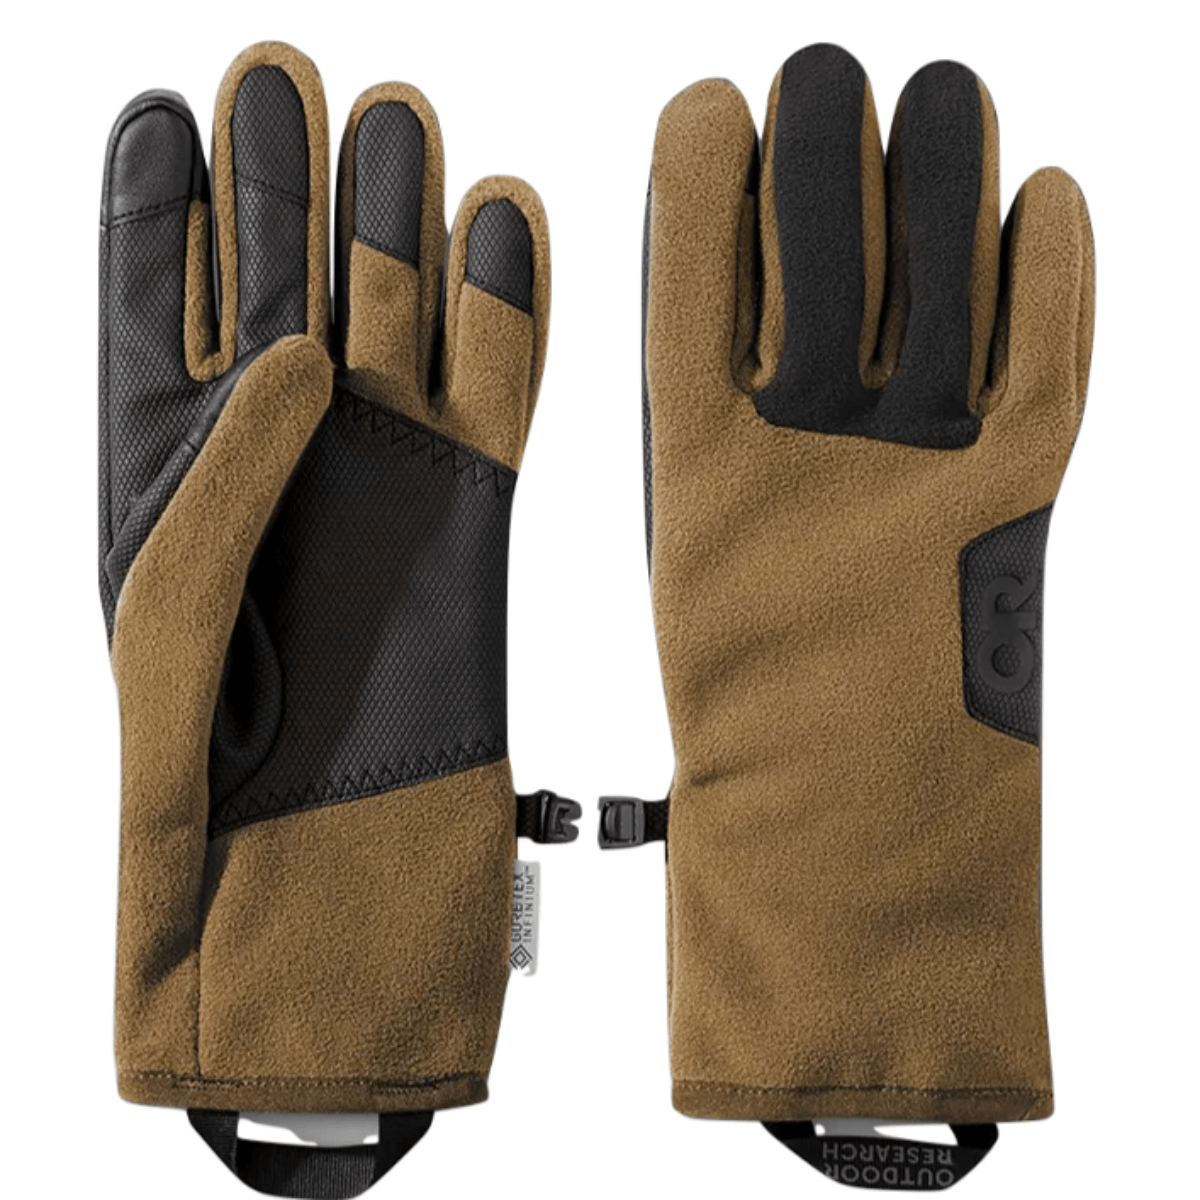 Manzella Men's Lightweight Gore-Tex Infinium Glove, Touchscreen Capable  with Windproof Protection Against Cold Weather